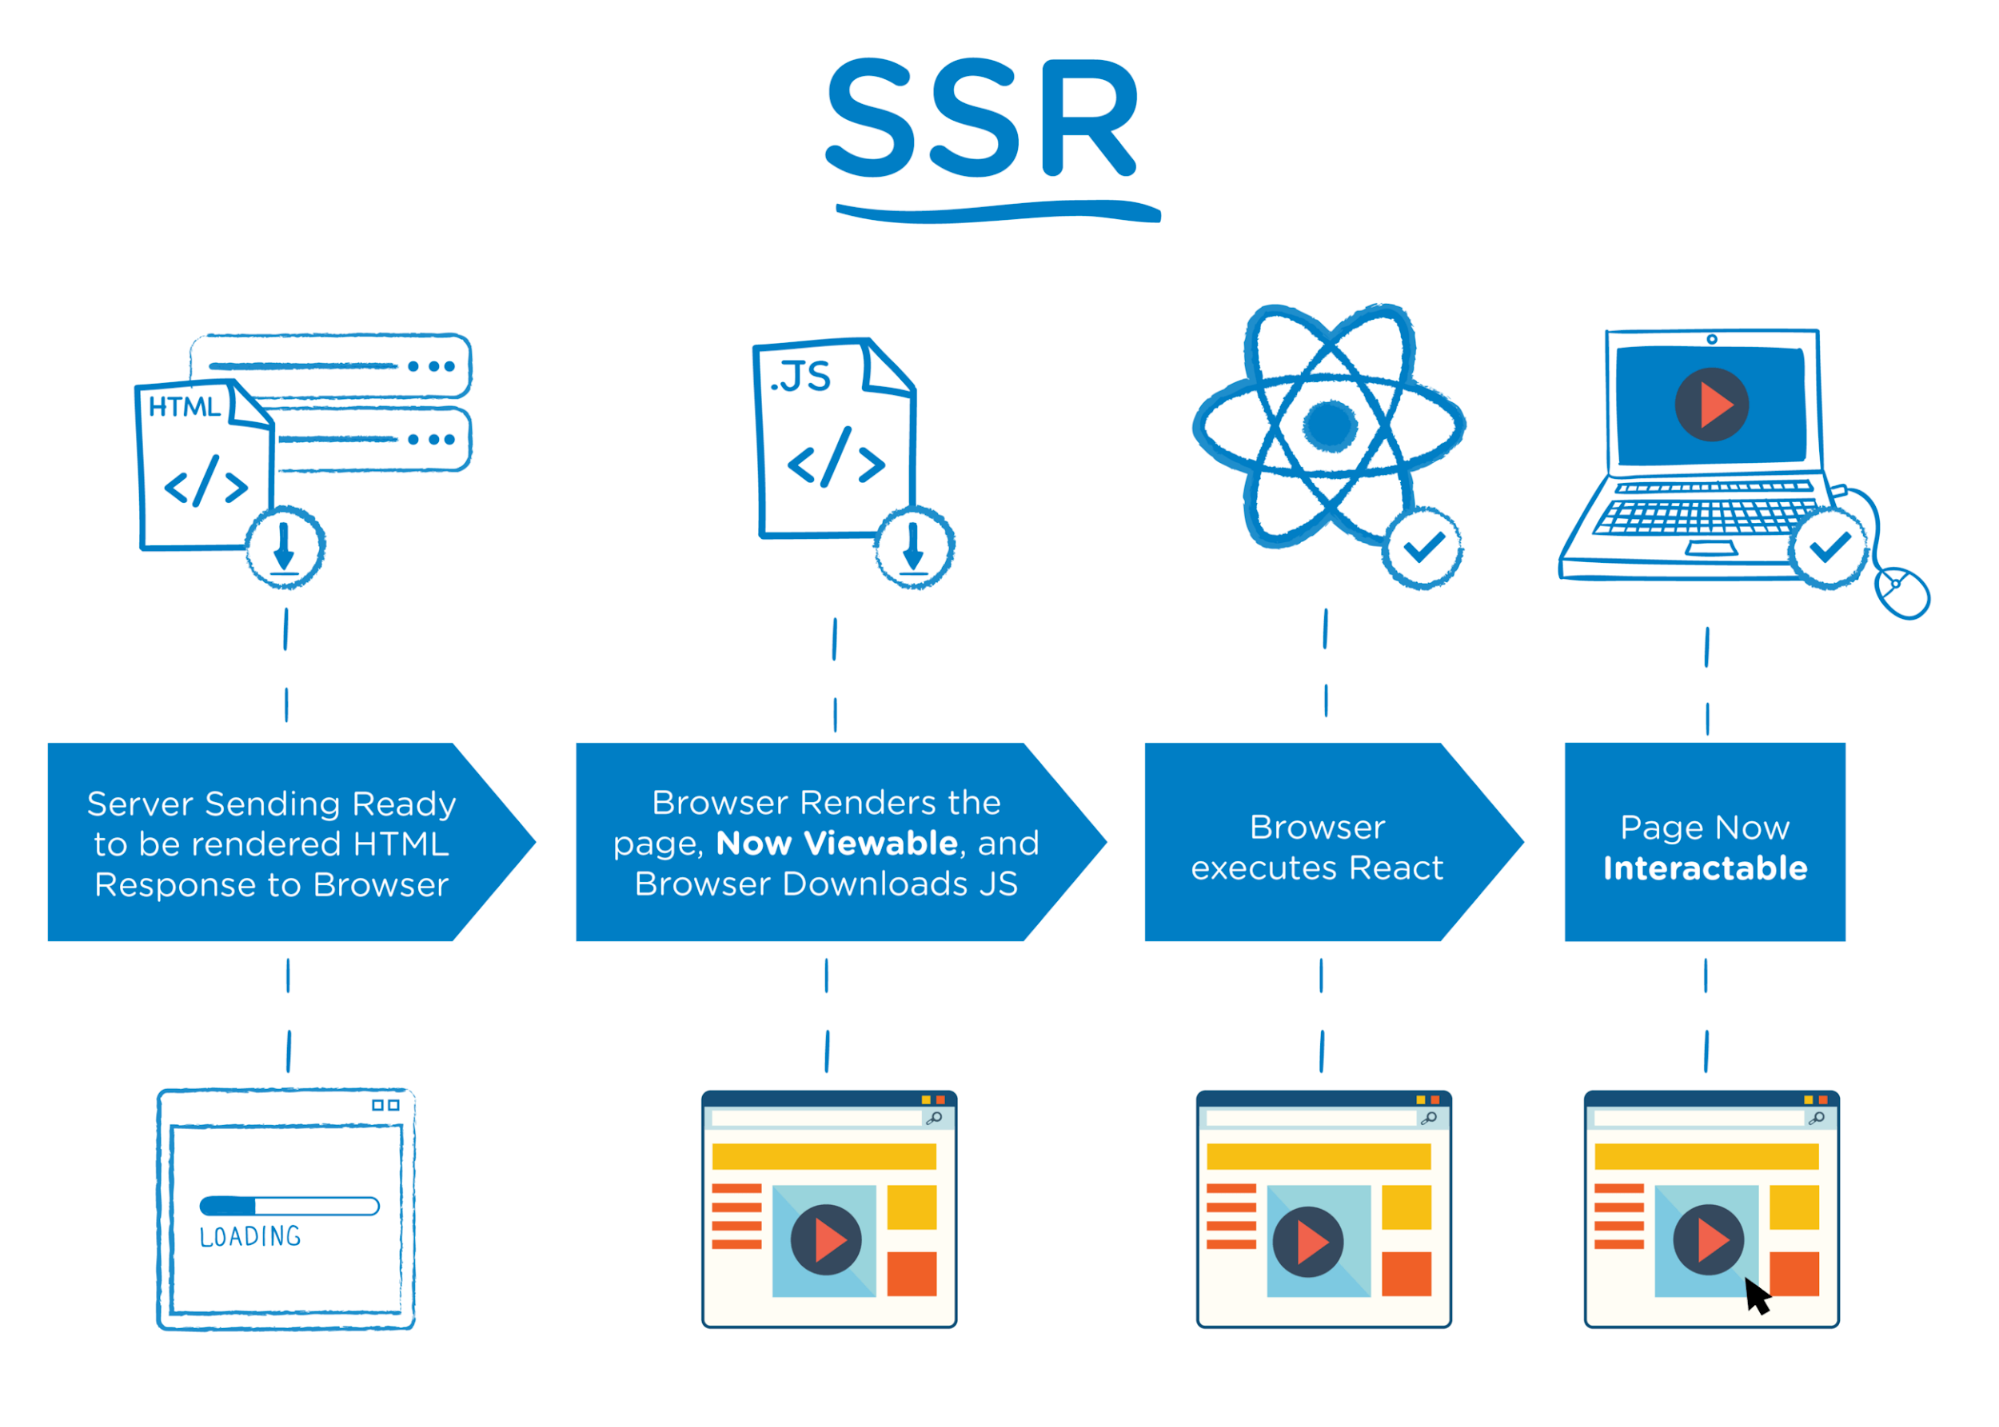 What is Client-Side Rendering (CSR) and Server-Side Rendering (SSR)?